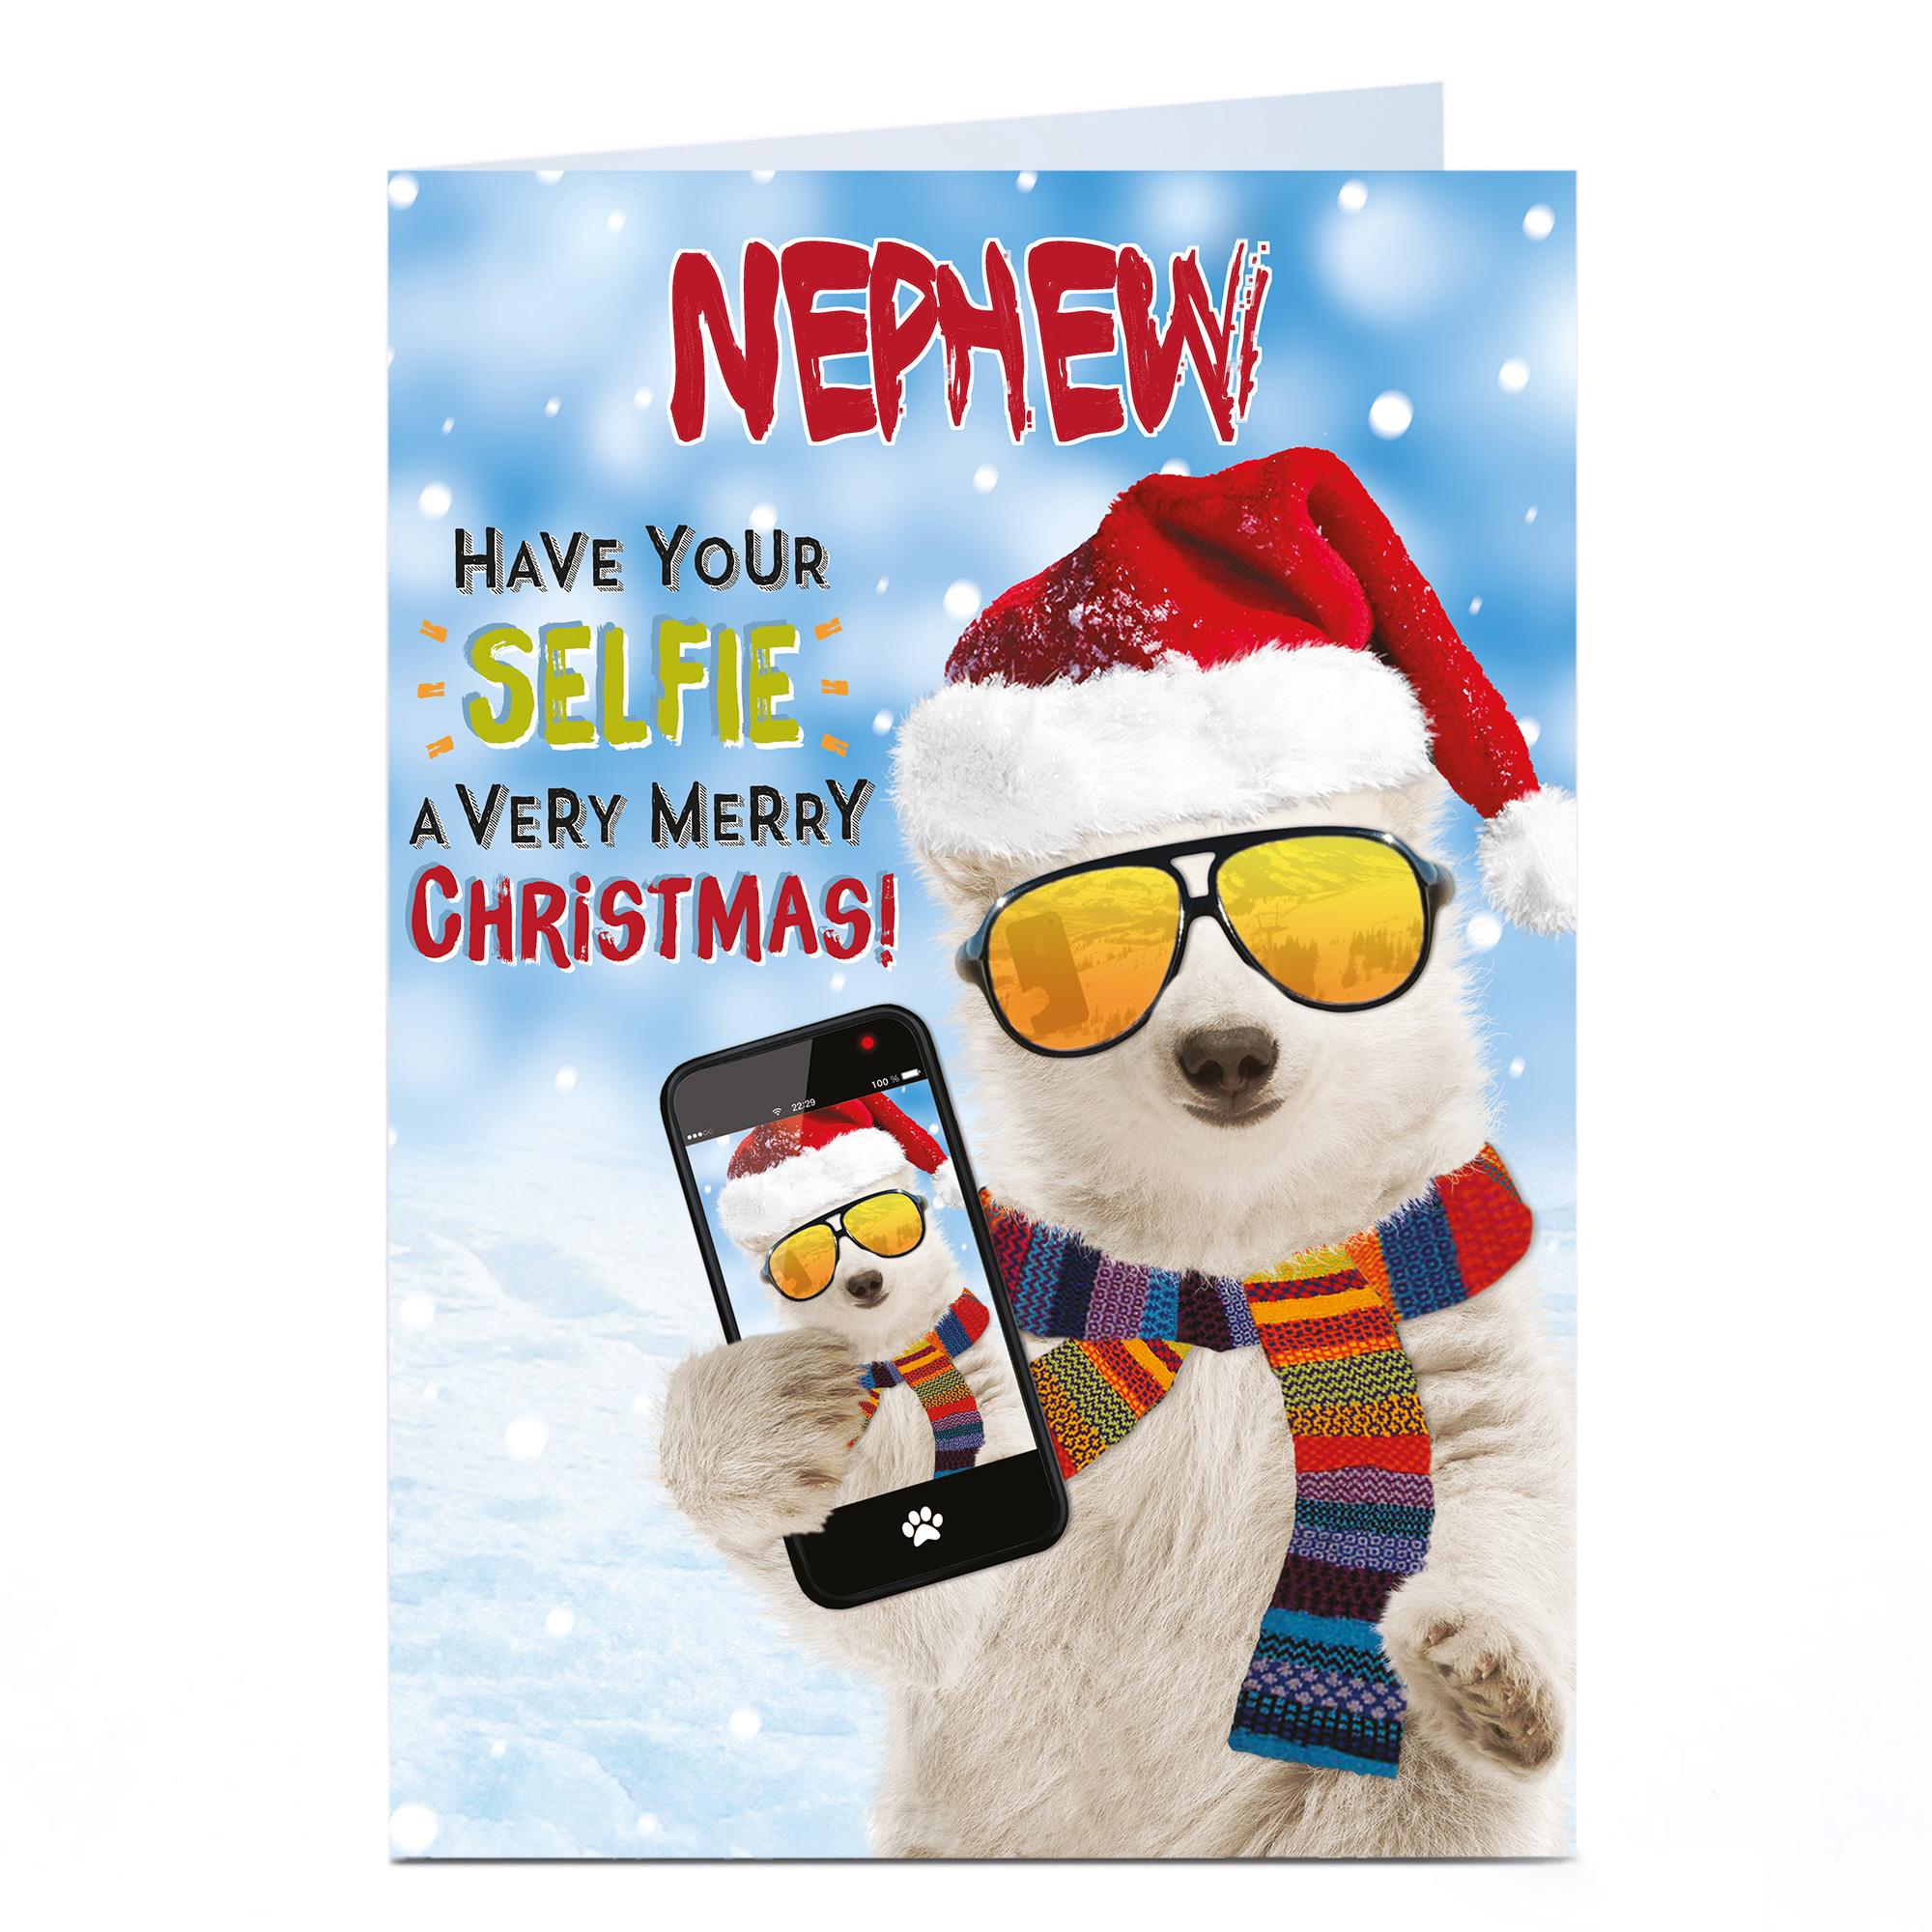 Personalised Christmas Card - Have Your Selfie A Merry Christmas - Nephew